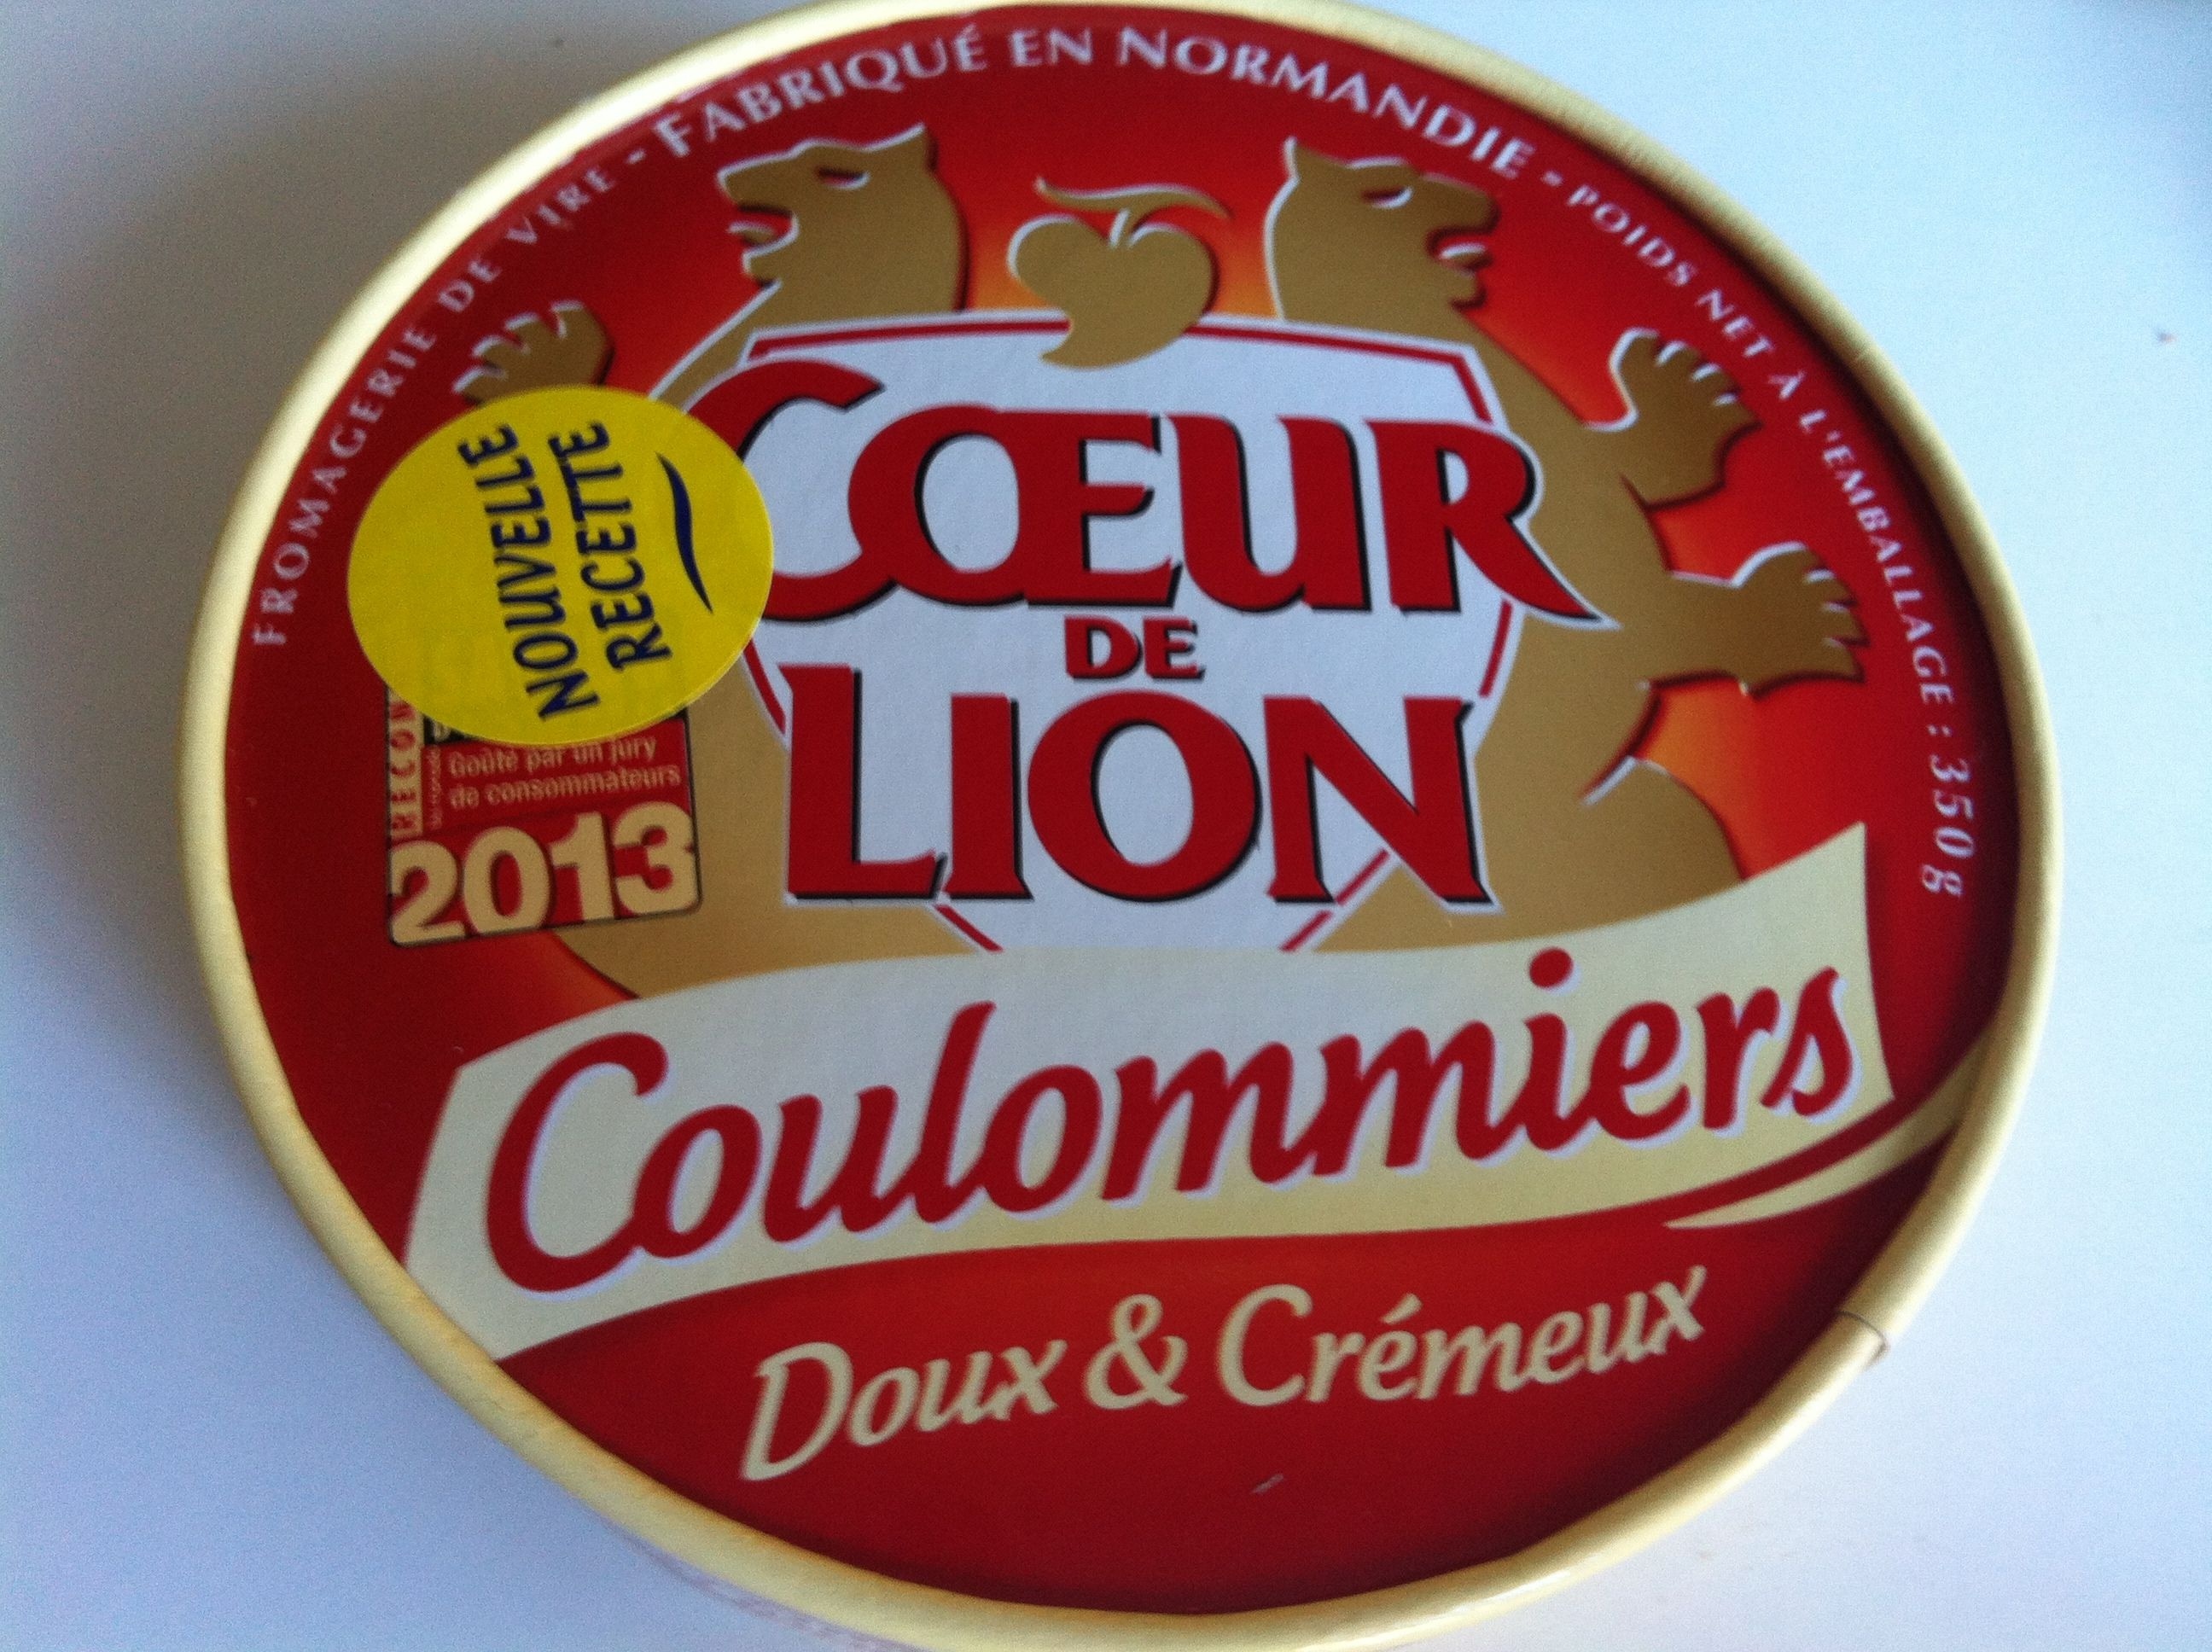 Coulommiers (23% MG) - Product - fr